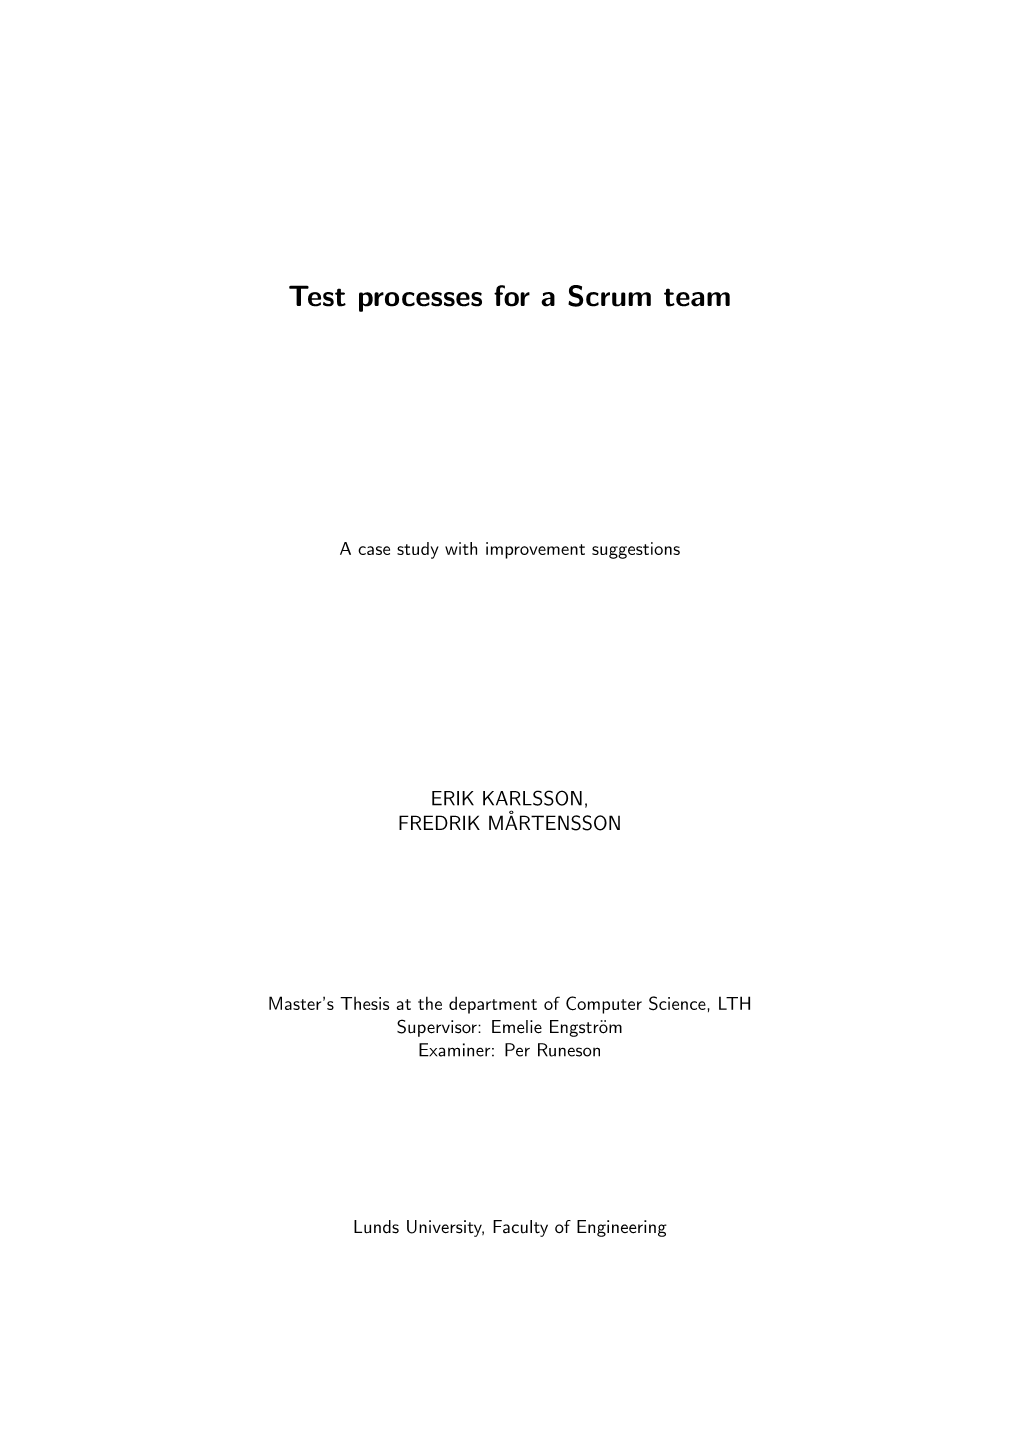 Test Processes for a Scrum Team